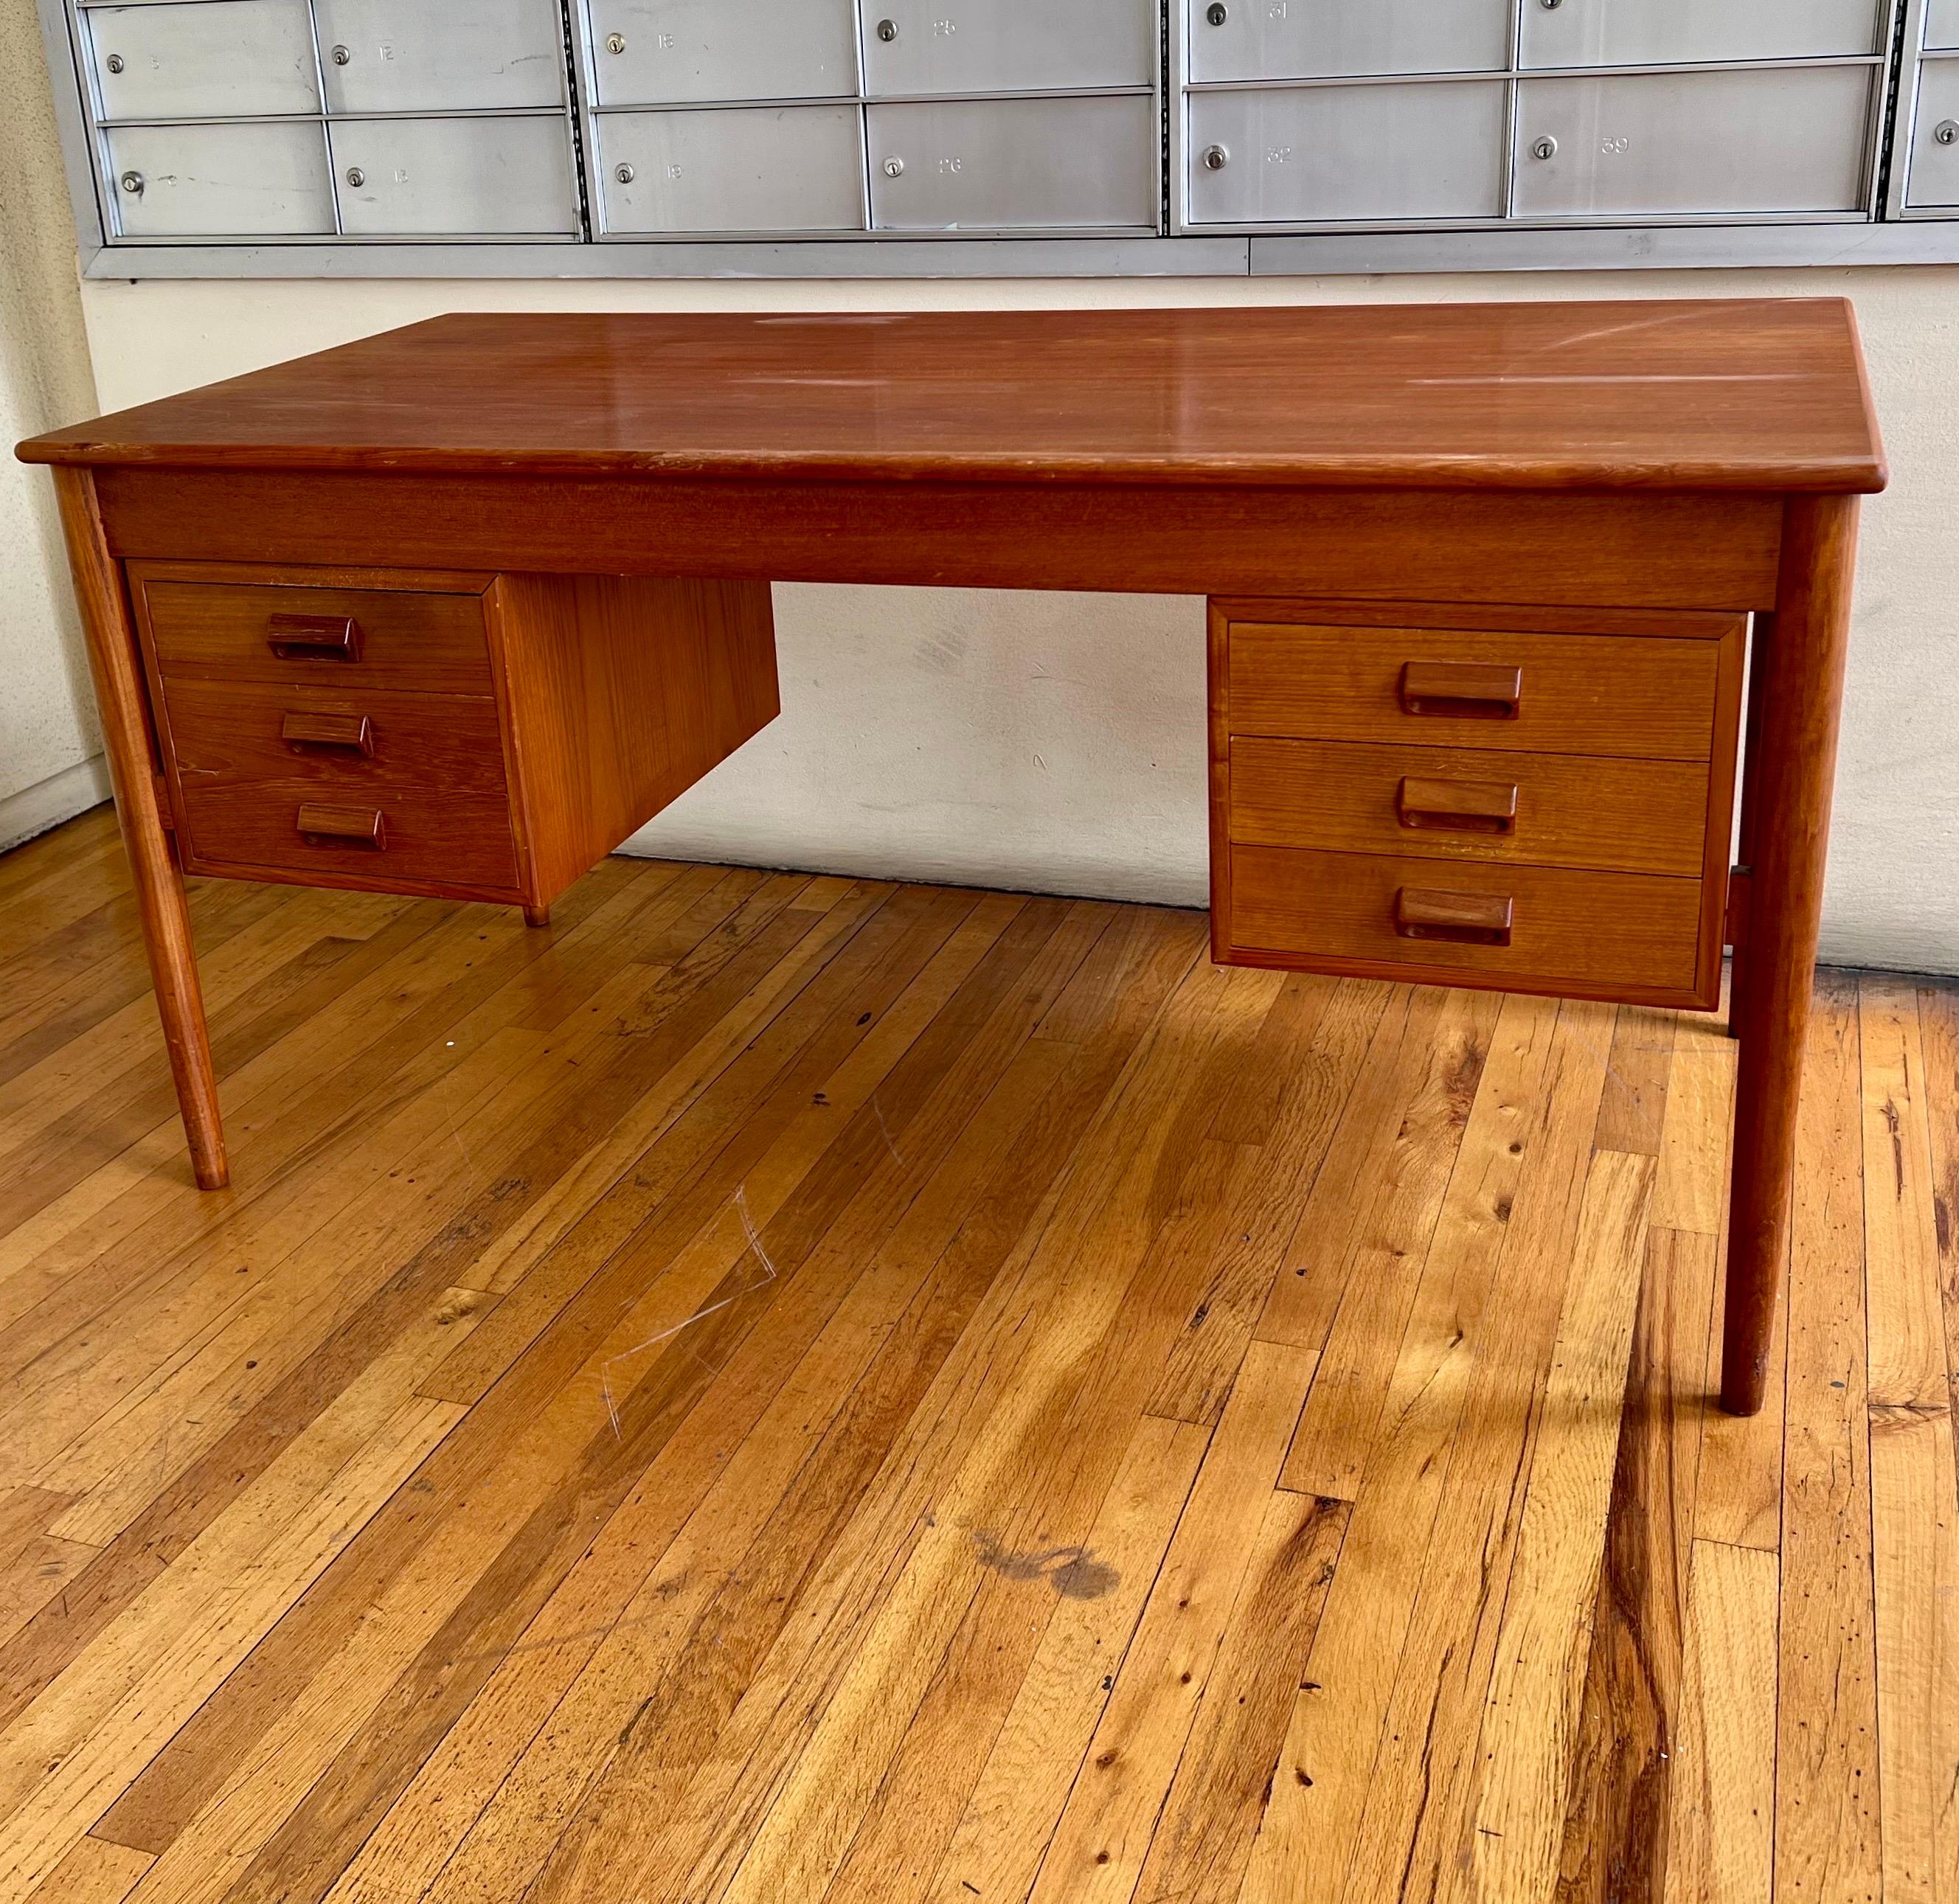 Beautiful elegant Danish design desk by Borge Mogensen in teak nice quality and craftsmanship, dovetail drawers, we have lightly sanded and refinished the top, cleaned and oiled the desk looks great.